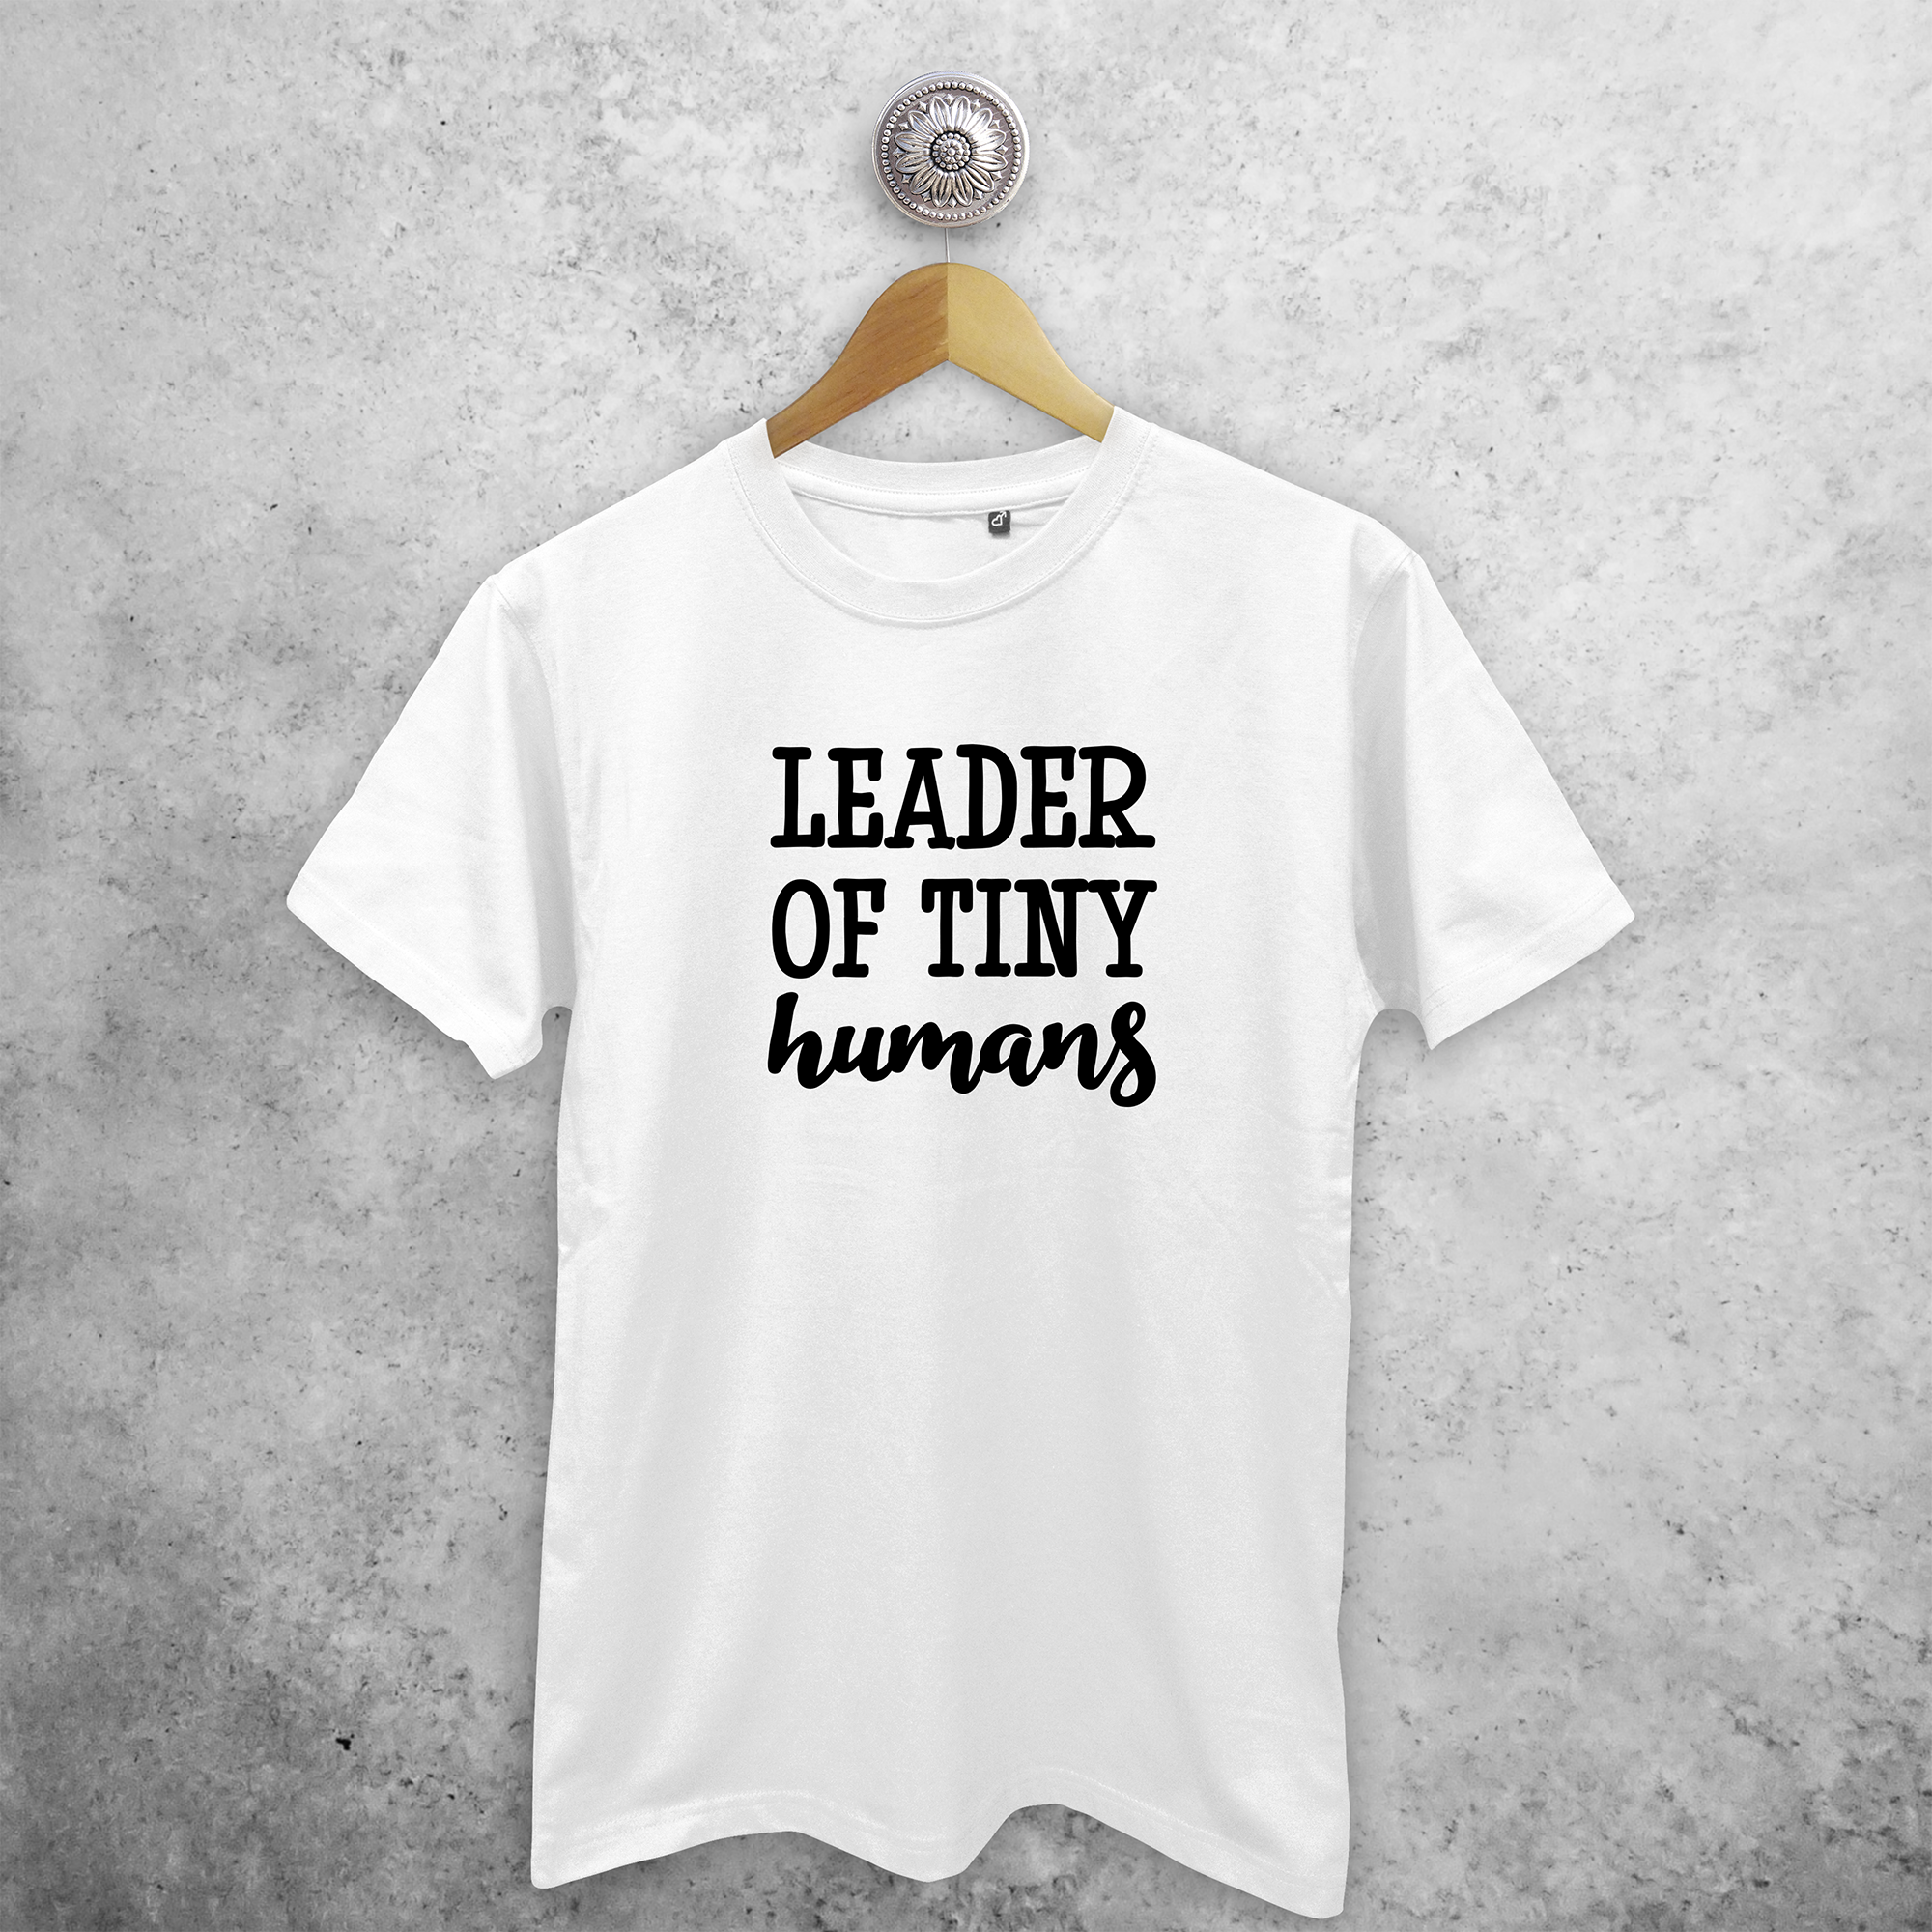 'Leader of tiny humans' adult shirt